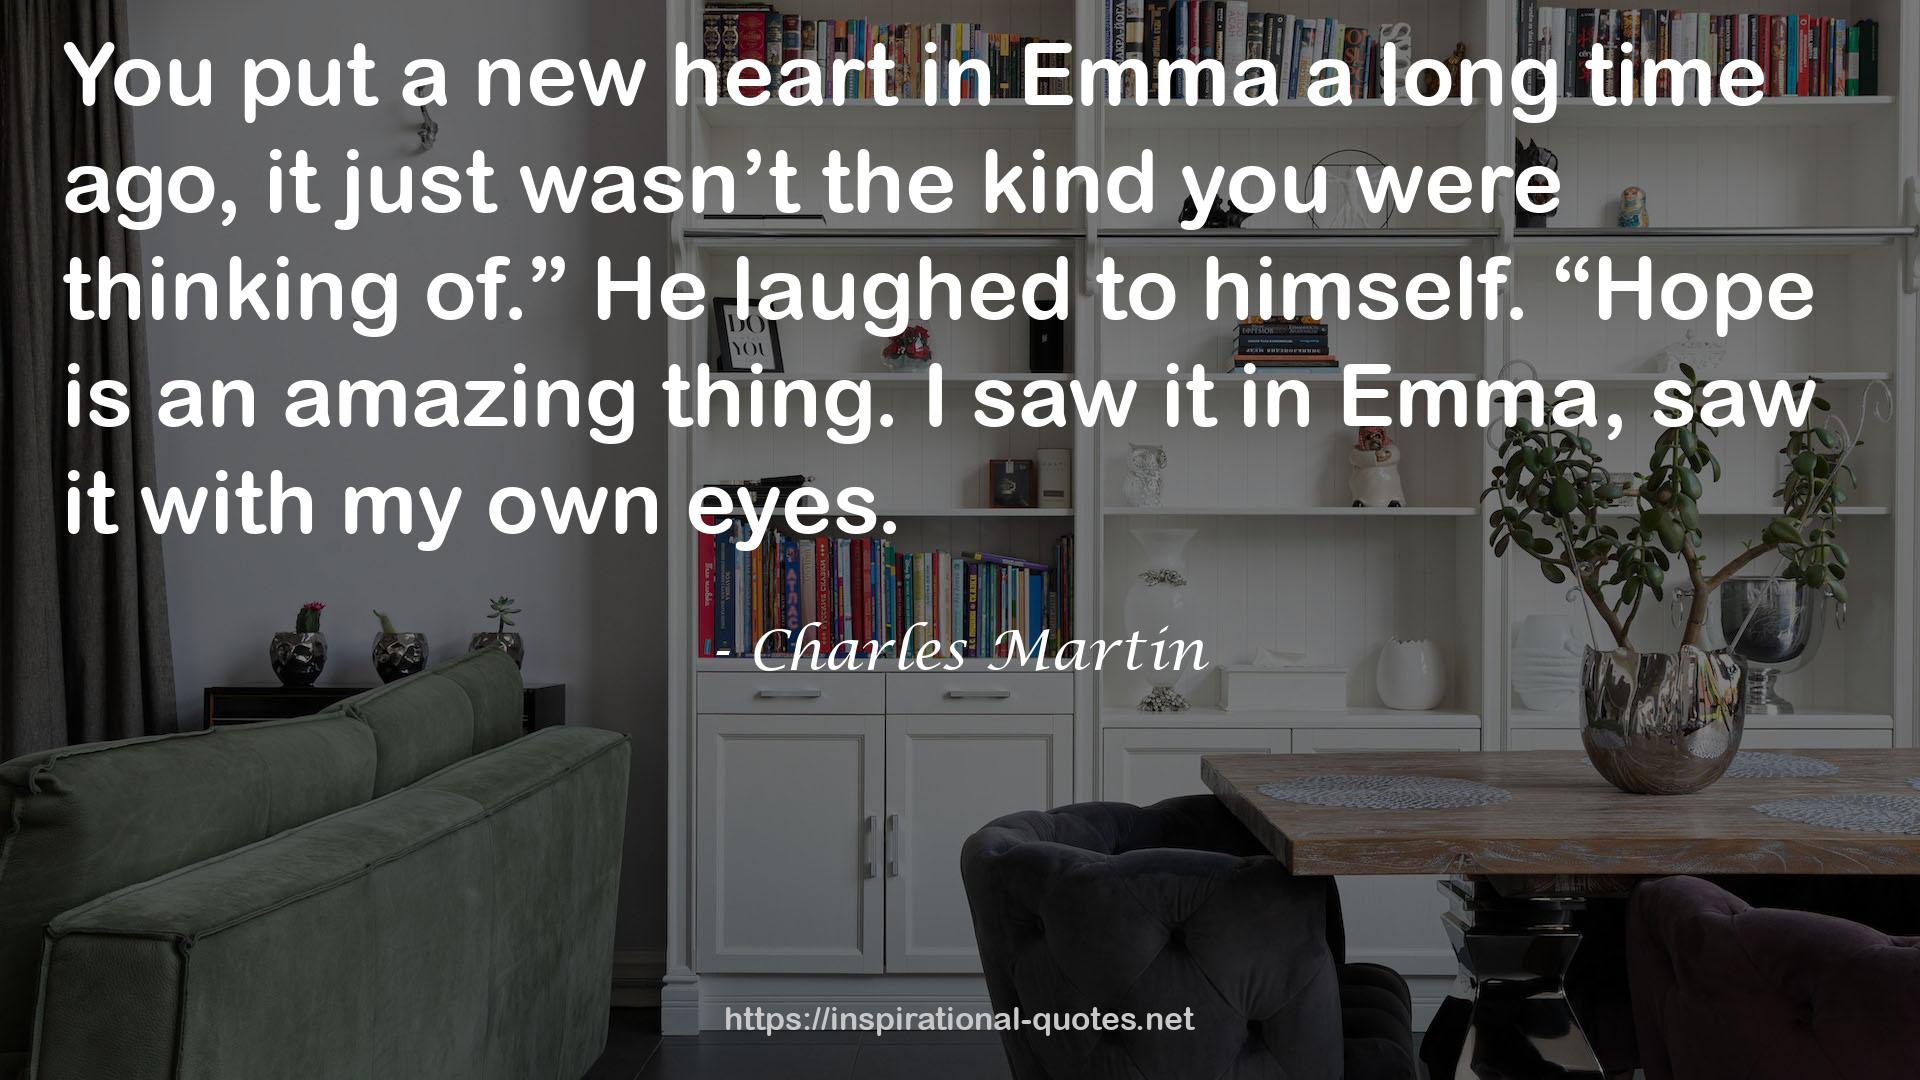 Charles Martin QUOTES